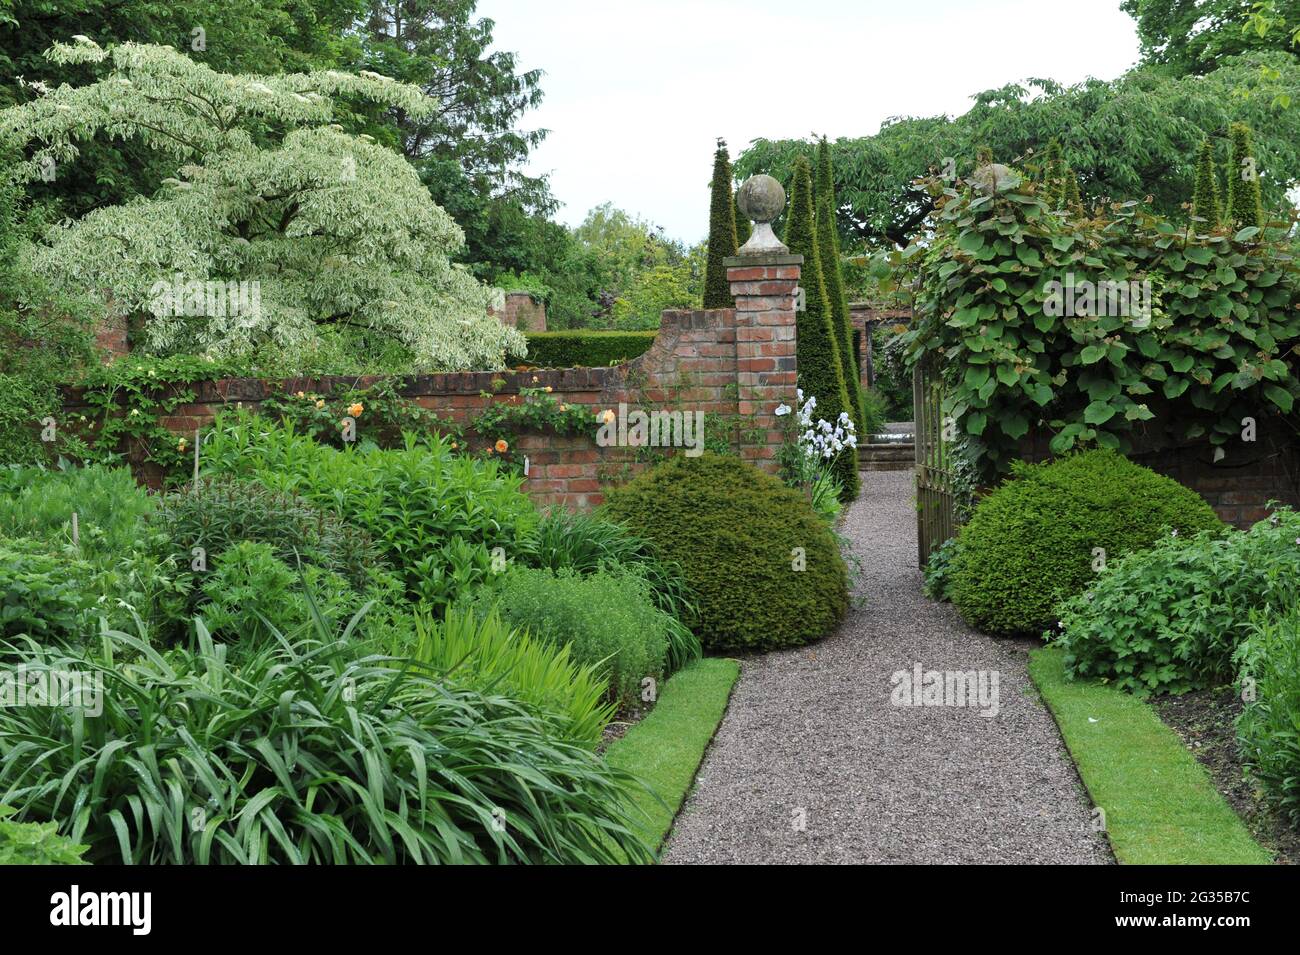 WOLLERTON, SHROPSHIRE / UNITED KINGDOM - 22 MAY 2014: The garden at Wollerton Old Hall Stock Photo